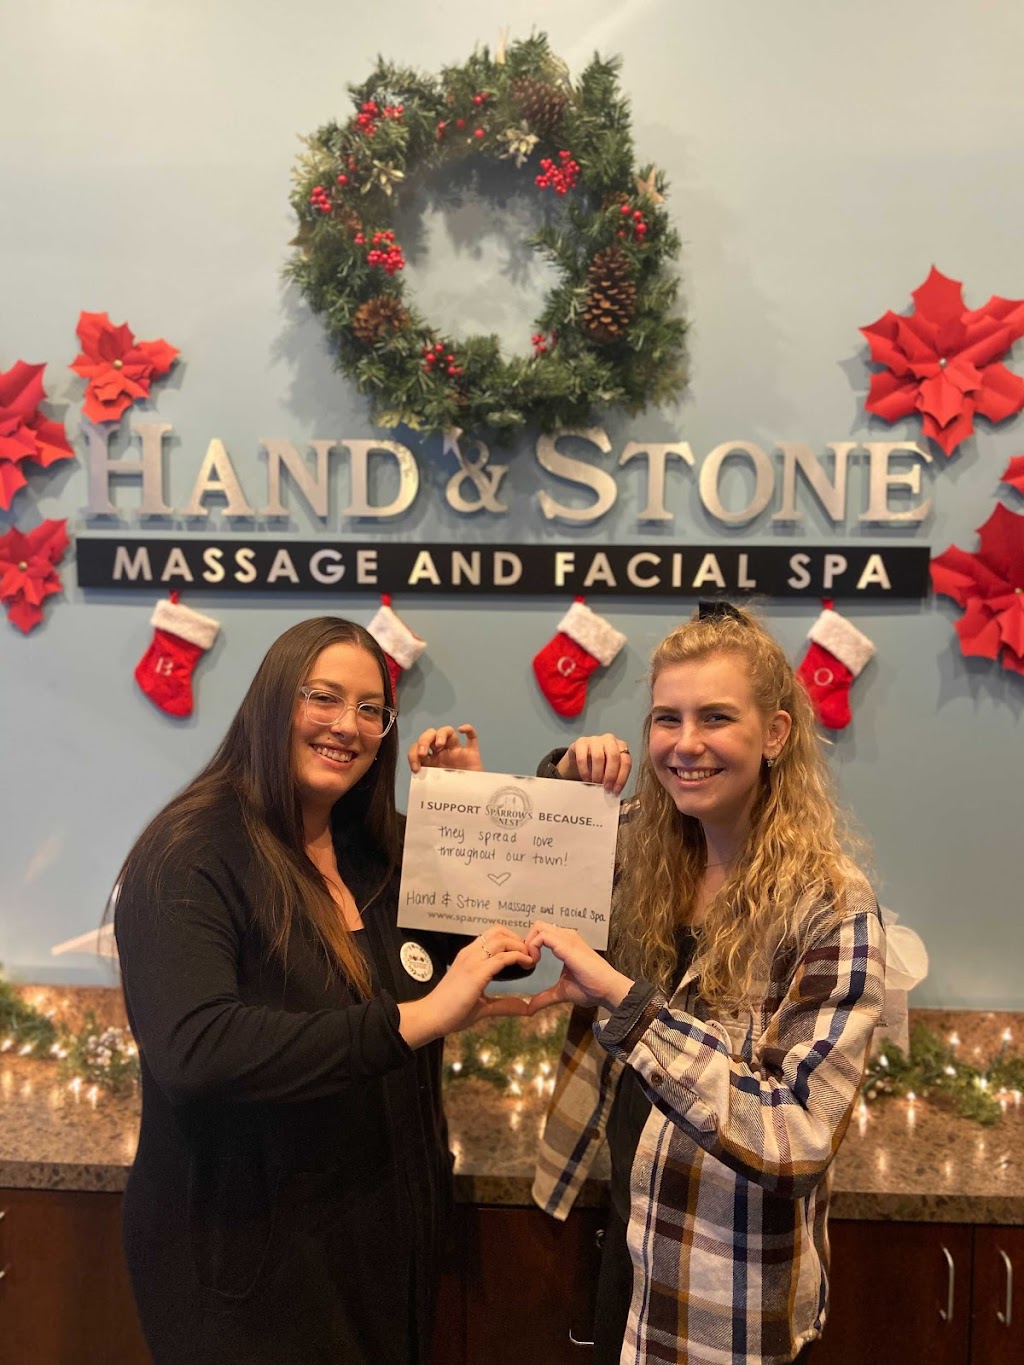 Hand and Stone Massage and Facial Spa | 1895 South Rd, Poughkeepsie, NY 12601 | Phone: (845) 859-0068